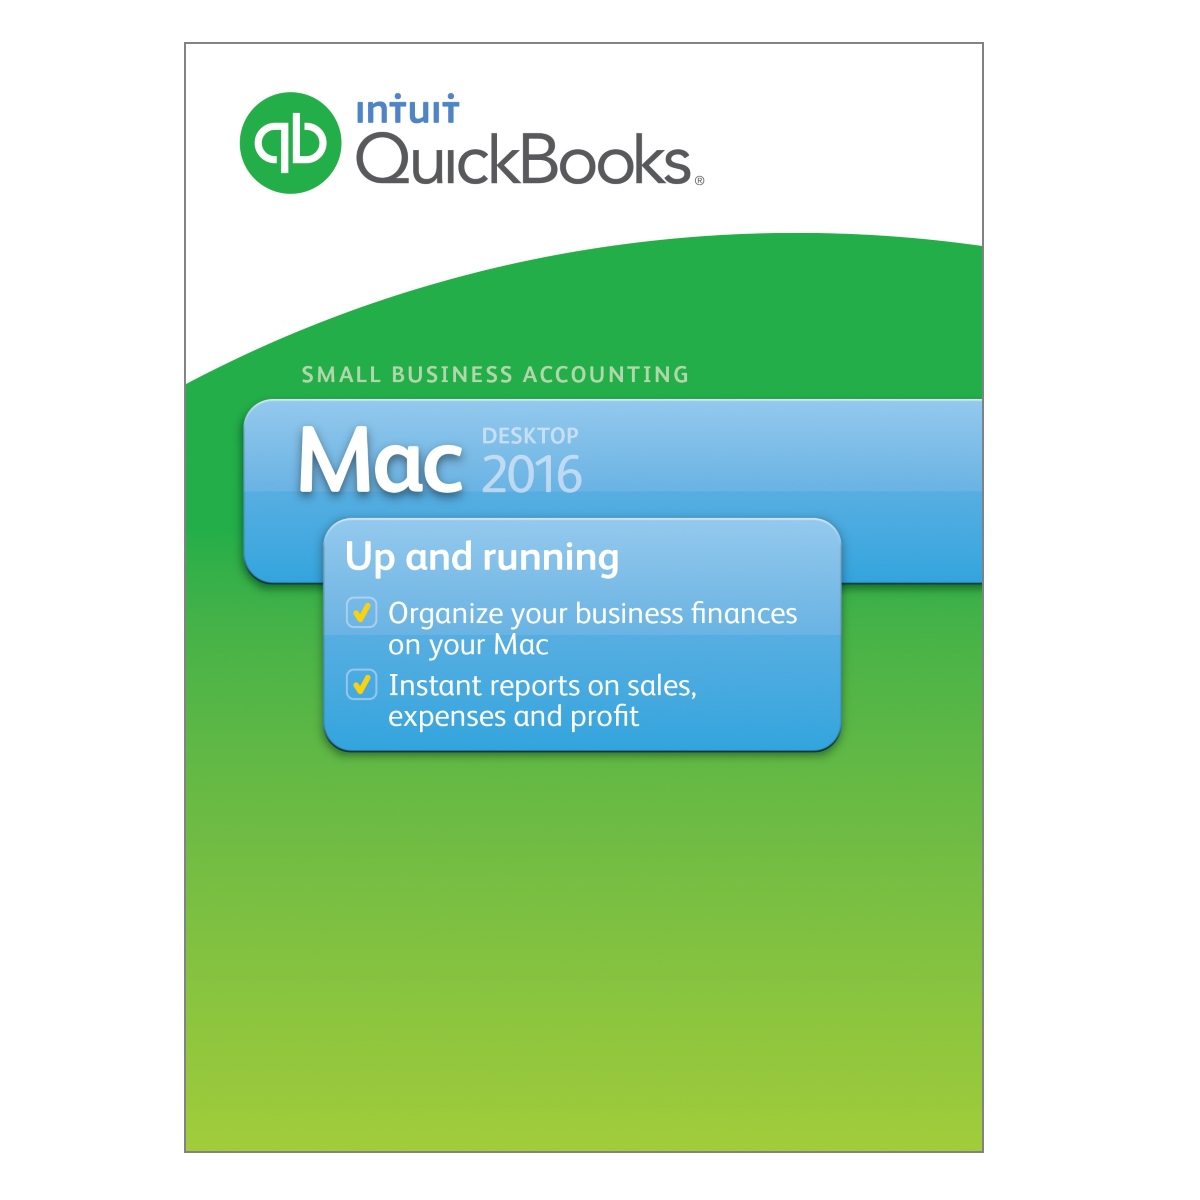 Scanners that work with quickbooks for mac